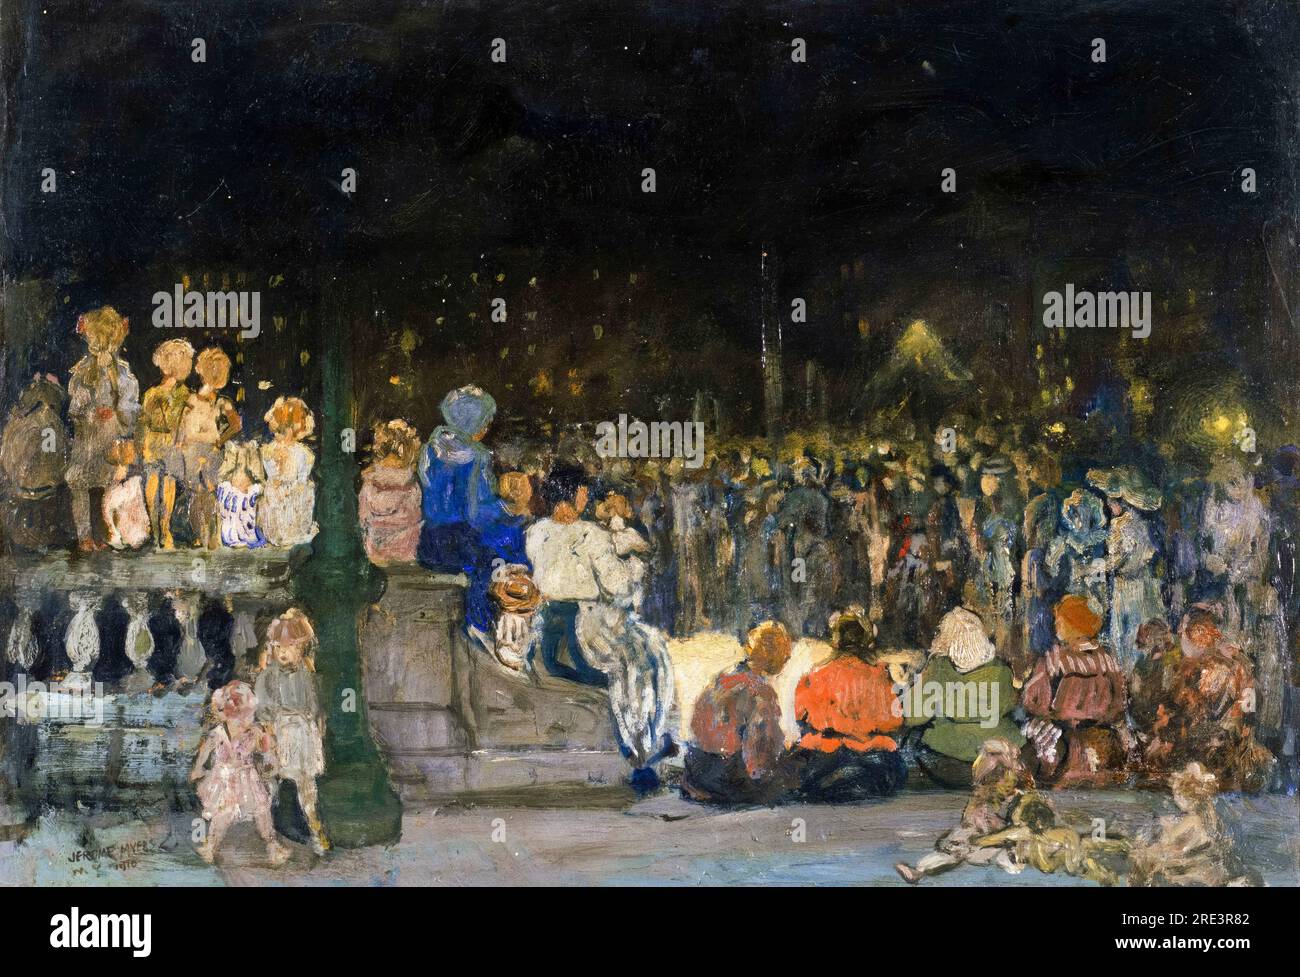 Jerome Myers, Band Concert Night, painting in oil on canvas, 1910 Reworked 1916 Stock Photo